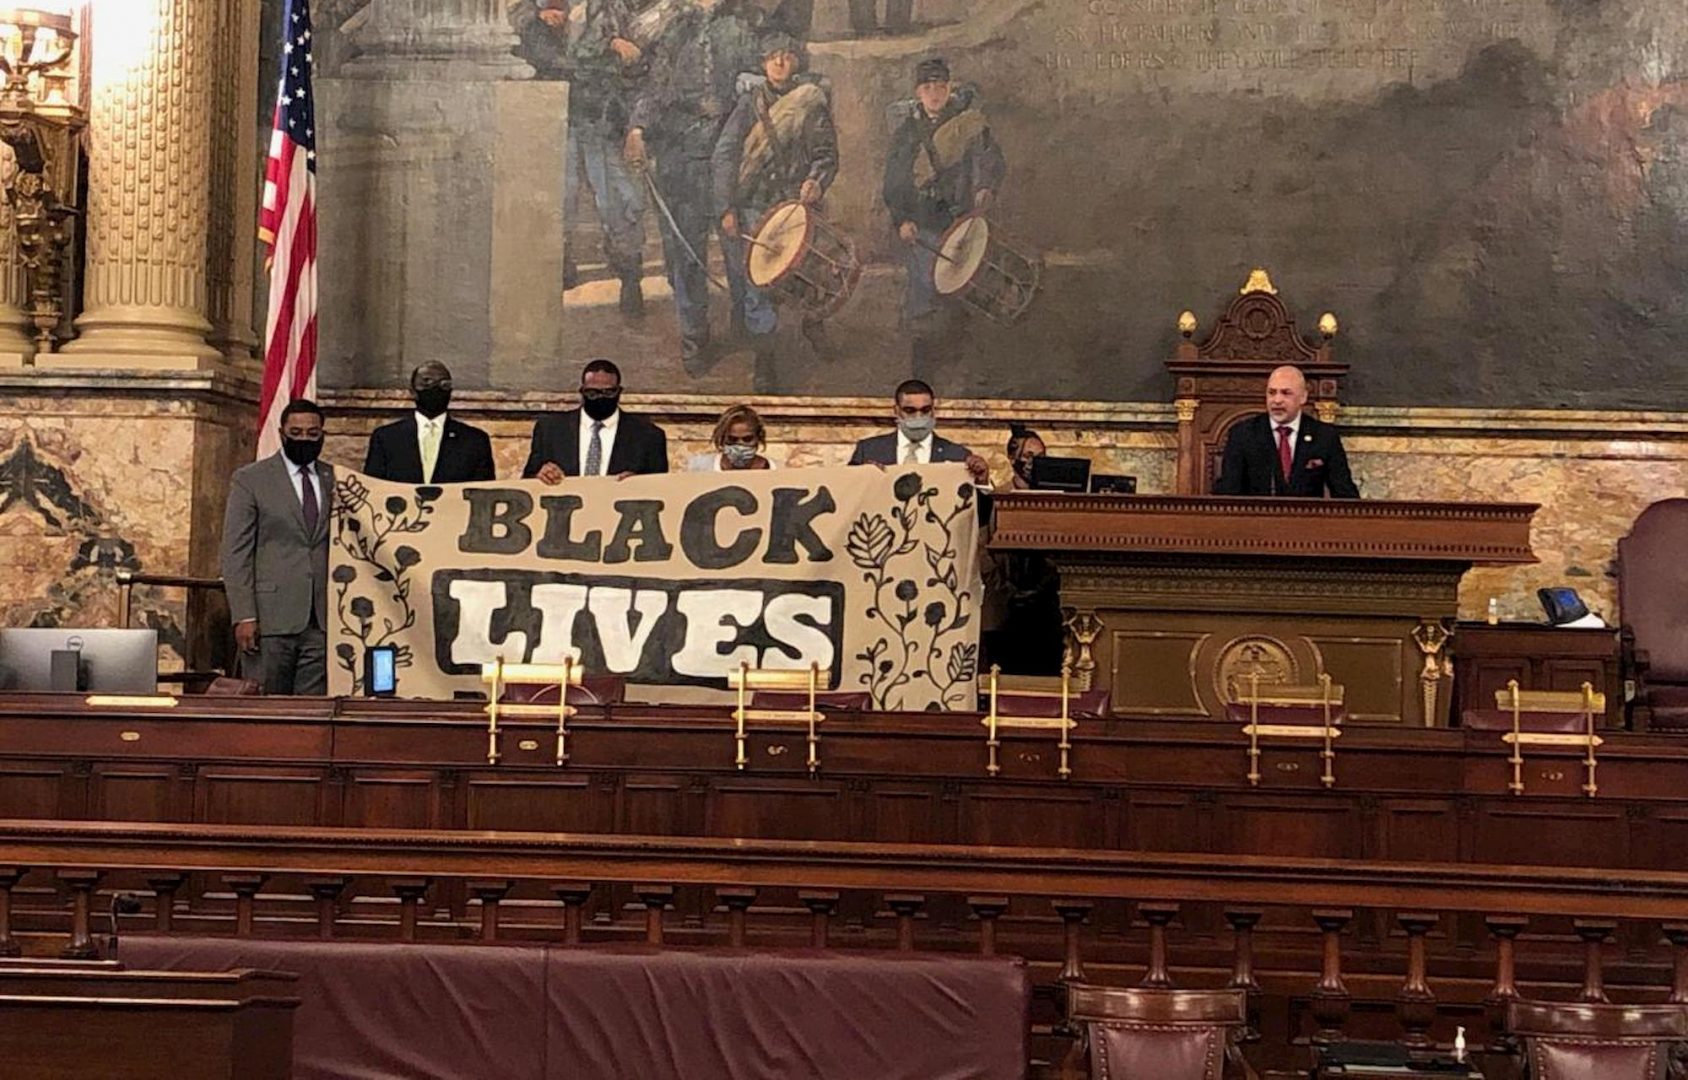 Five Pa. House Democrats hold a Black Lives Matter protest while state Rep. Christopher Rabb (D-Philadelphia) delivers remarks from the Speaker's rostrum on Monday, June 8, 2020. Black lawmakers prevented the regular session from beginning as scheduled in order to protest the killing of George Floyd and to call on the GOP majority to take up a slate of police reform bills.